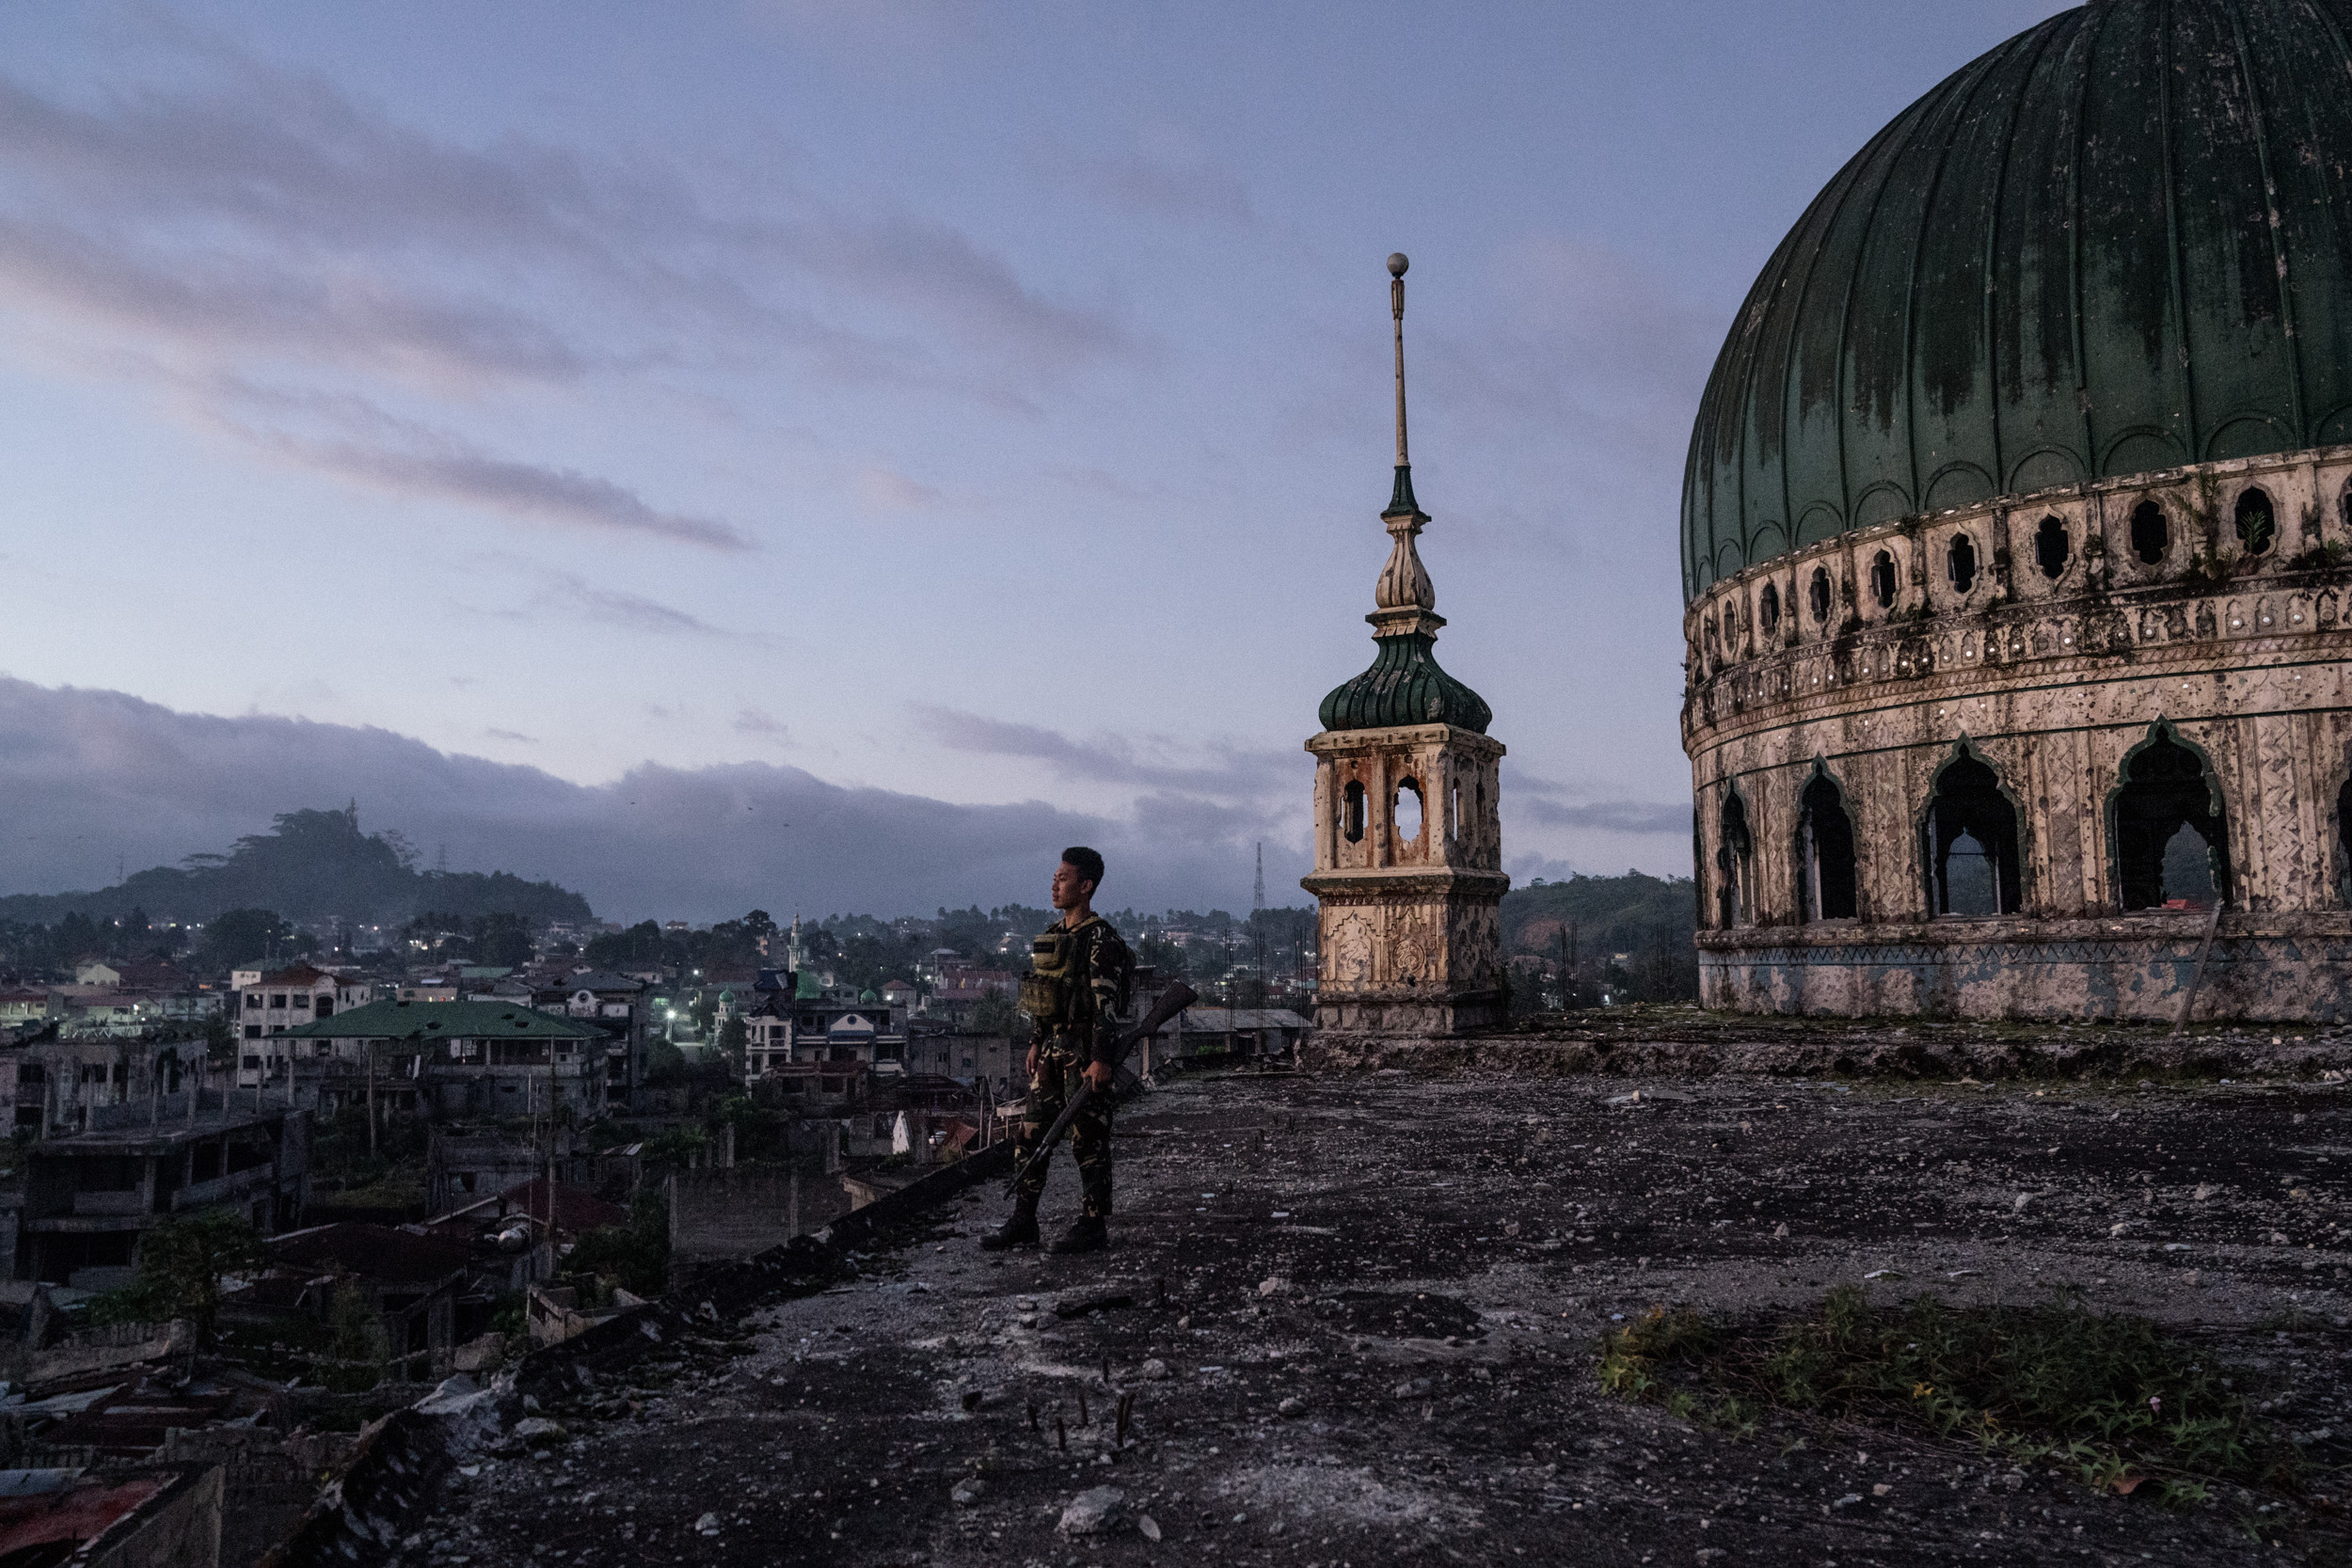  A soldier is seen in the Grand Mosque, which was destroyed during the Marawi siege. The masjid is still damaged more than a year since the Philippine military declared the Muslim-majority city of Marawi “liberated” from ISIS-linked militants. But th